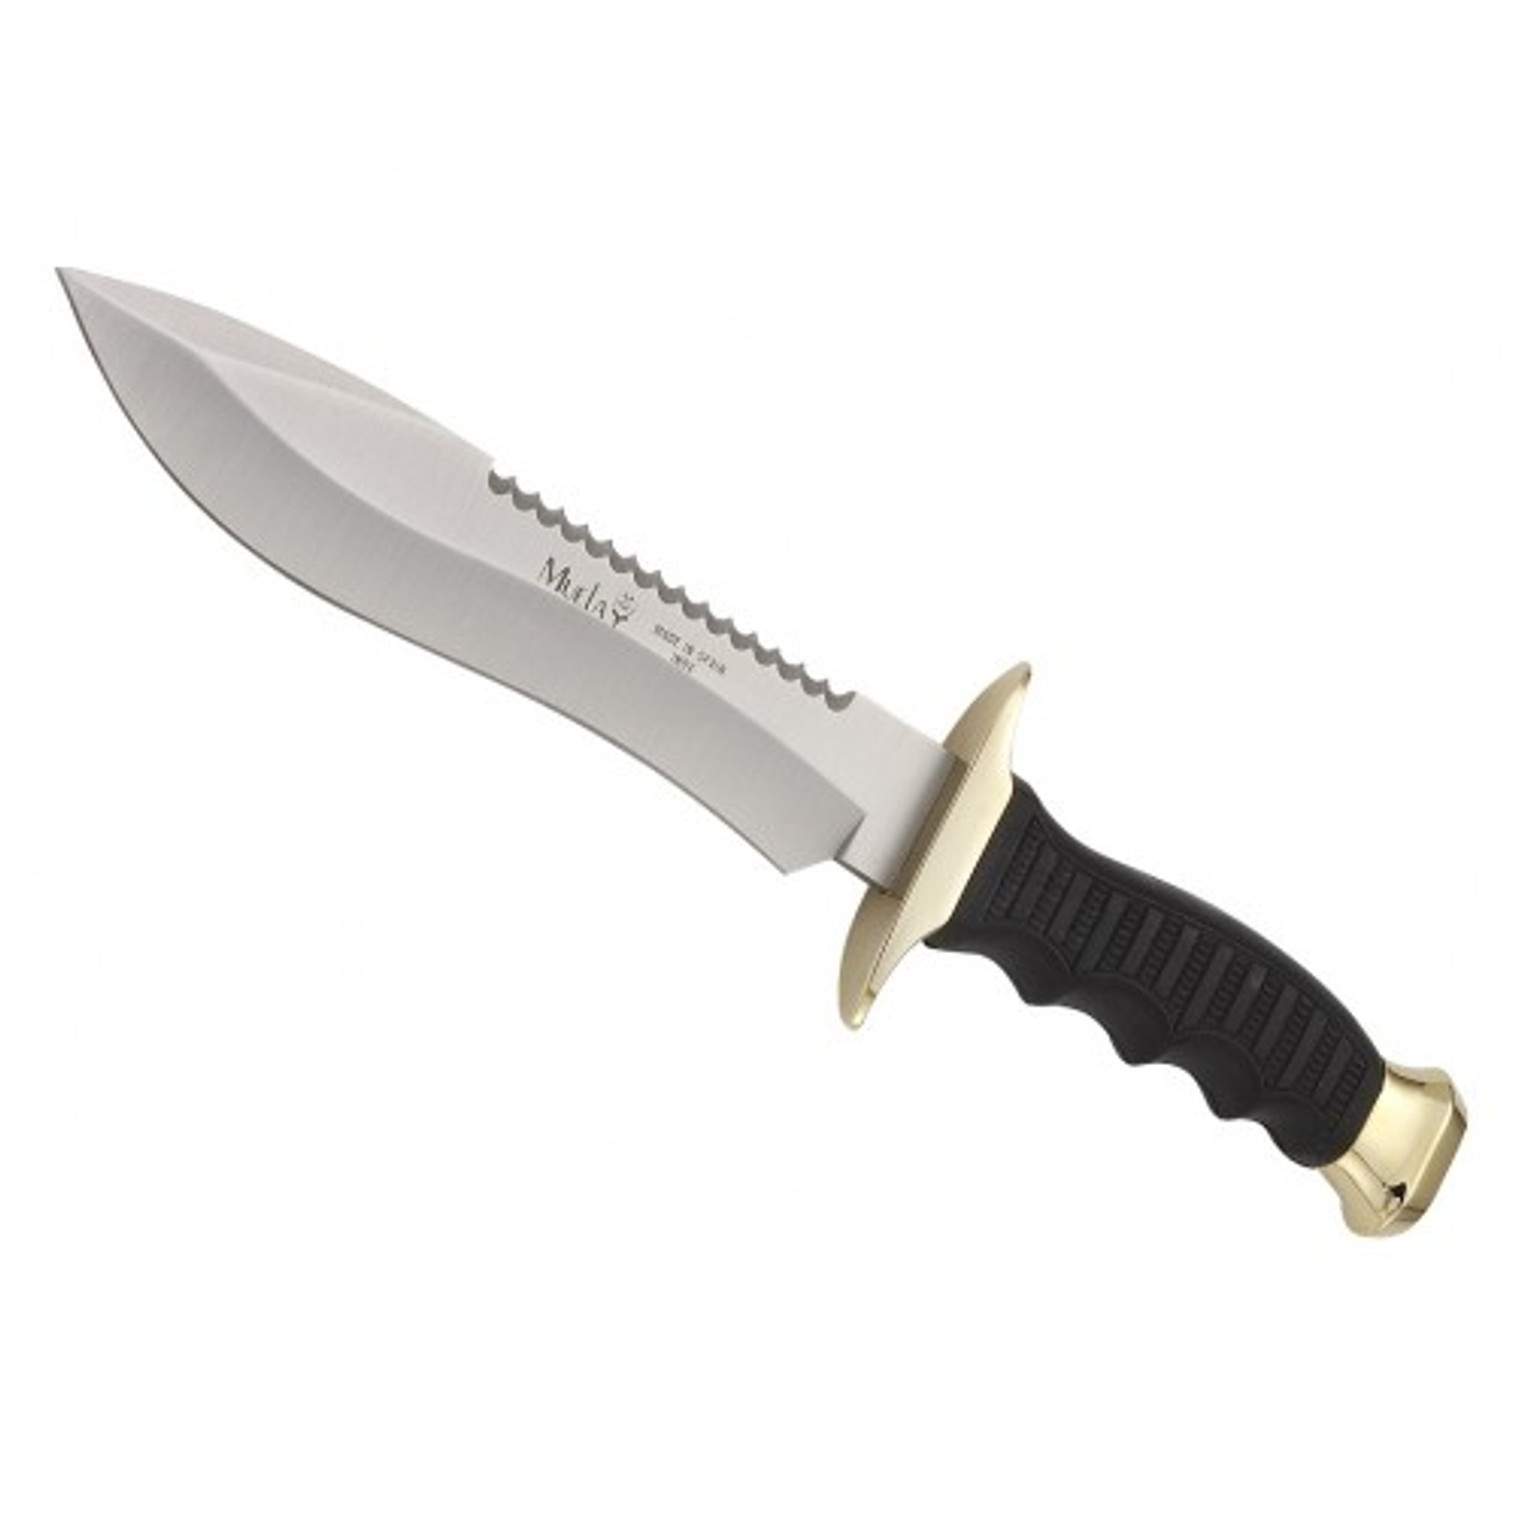 MUELA 85-180, 420H, 7-1/8" Fixed Blade Tactical Knife, Black/Gold Handle